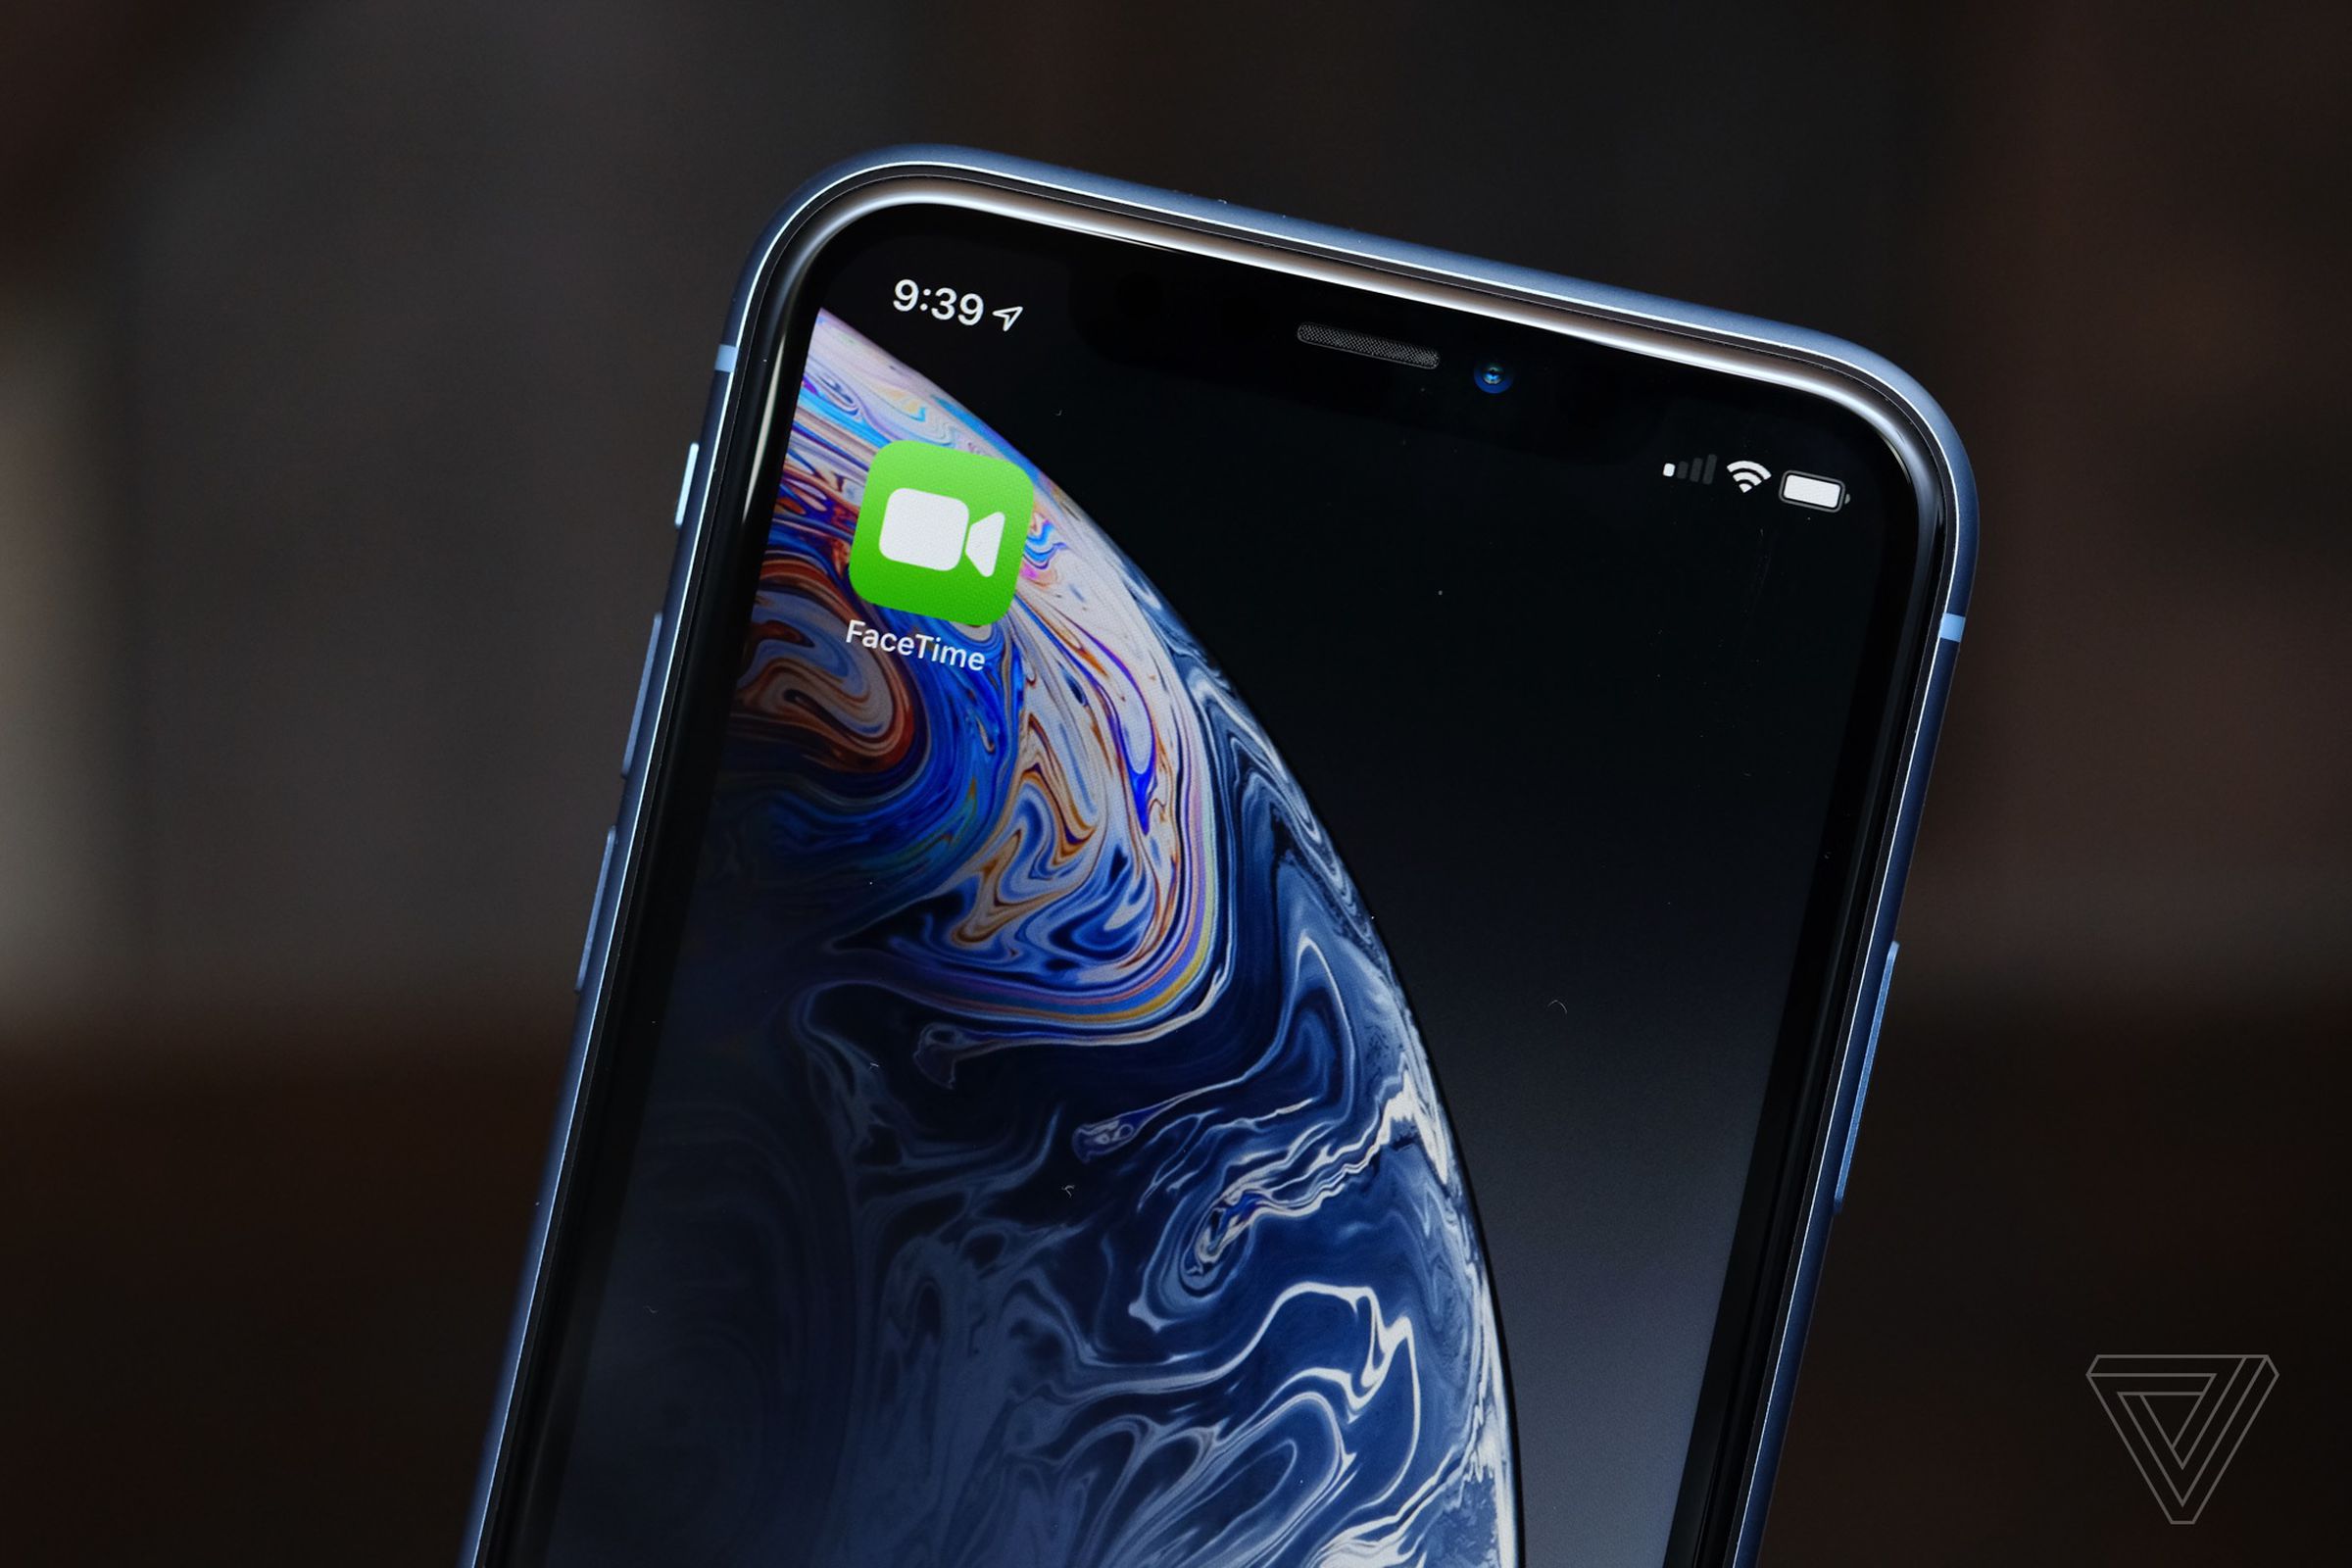 A photo of the iPhone with the FaceTime icon